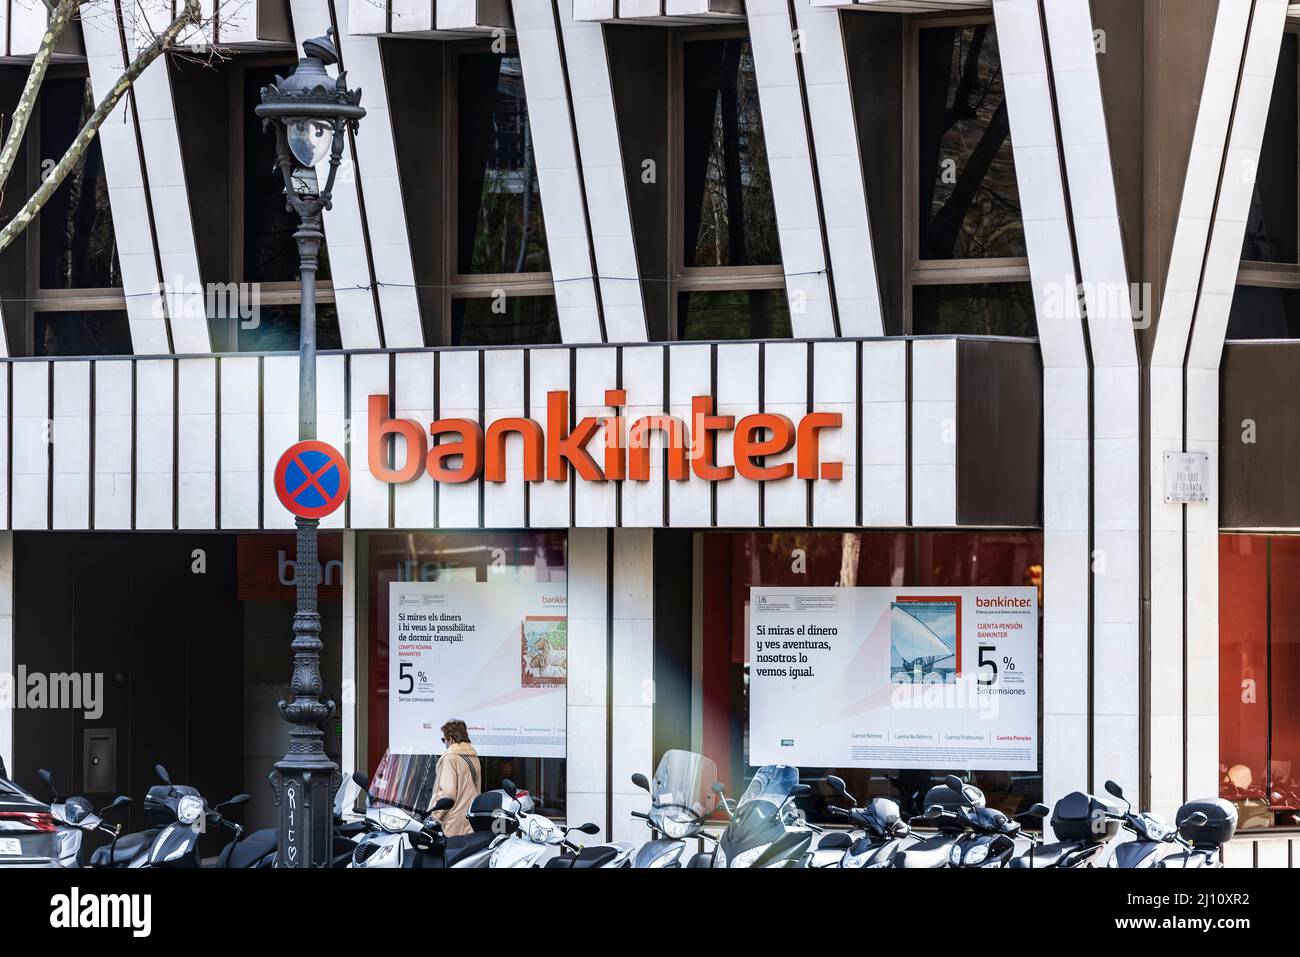 Barcelona, Spain - February 24, 2022: Facade and logo of the Bankinter office bank with people around in Barcelona, Catalonia, Spain Stock Photo